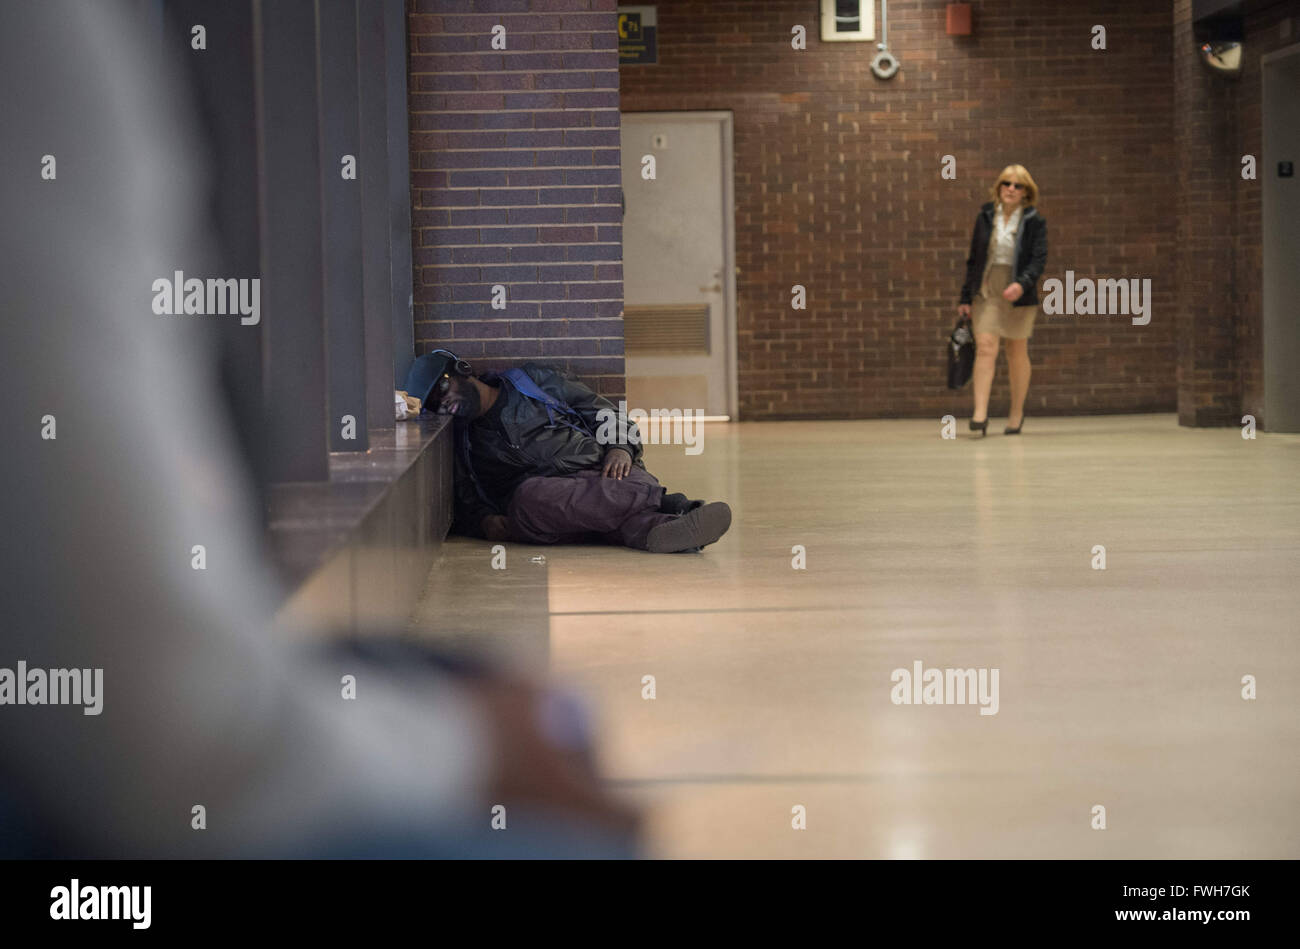 March 22, 2016 - New York, NY, U.S. - An unidentified person sleeps on the floor of Port Authority Bus Terminal, Tuesday, March 22, 2016. (Credit Image: © Bryan Smith via ZUMA Wire) Stock Photo